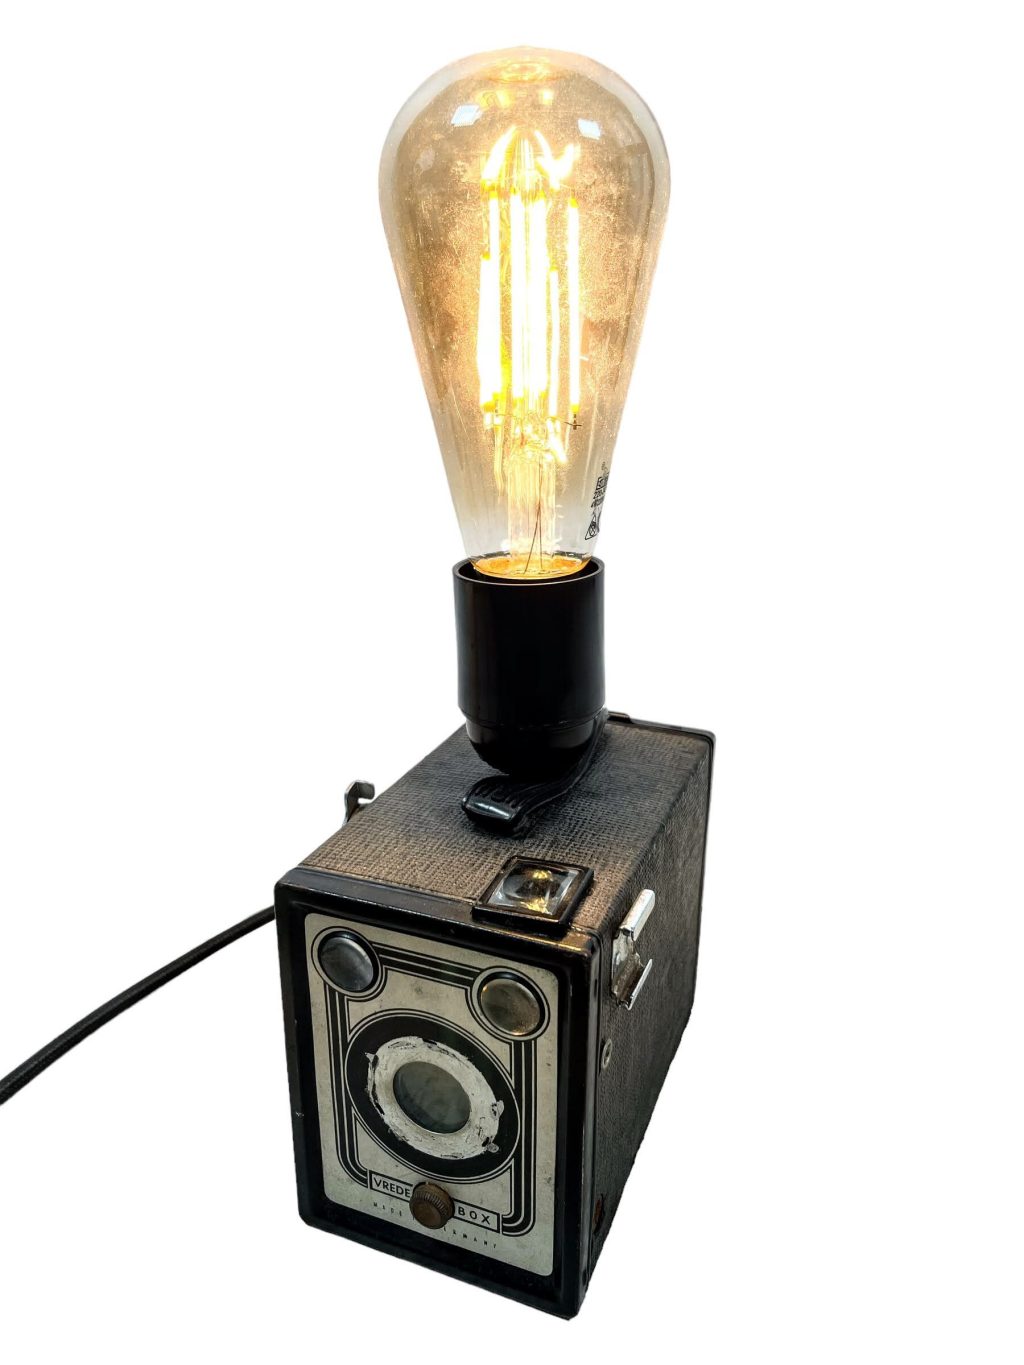 Antique German Vrede Box Upcycled Camera With Light Attachment Bulb Holder Desktop Bedside Lamp circa 1920’s